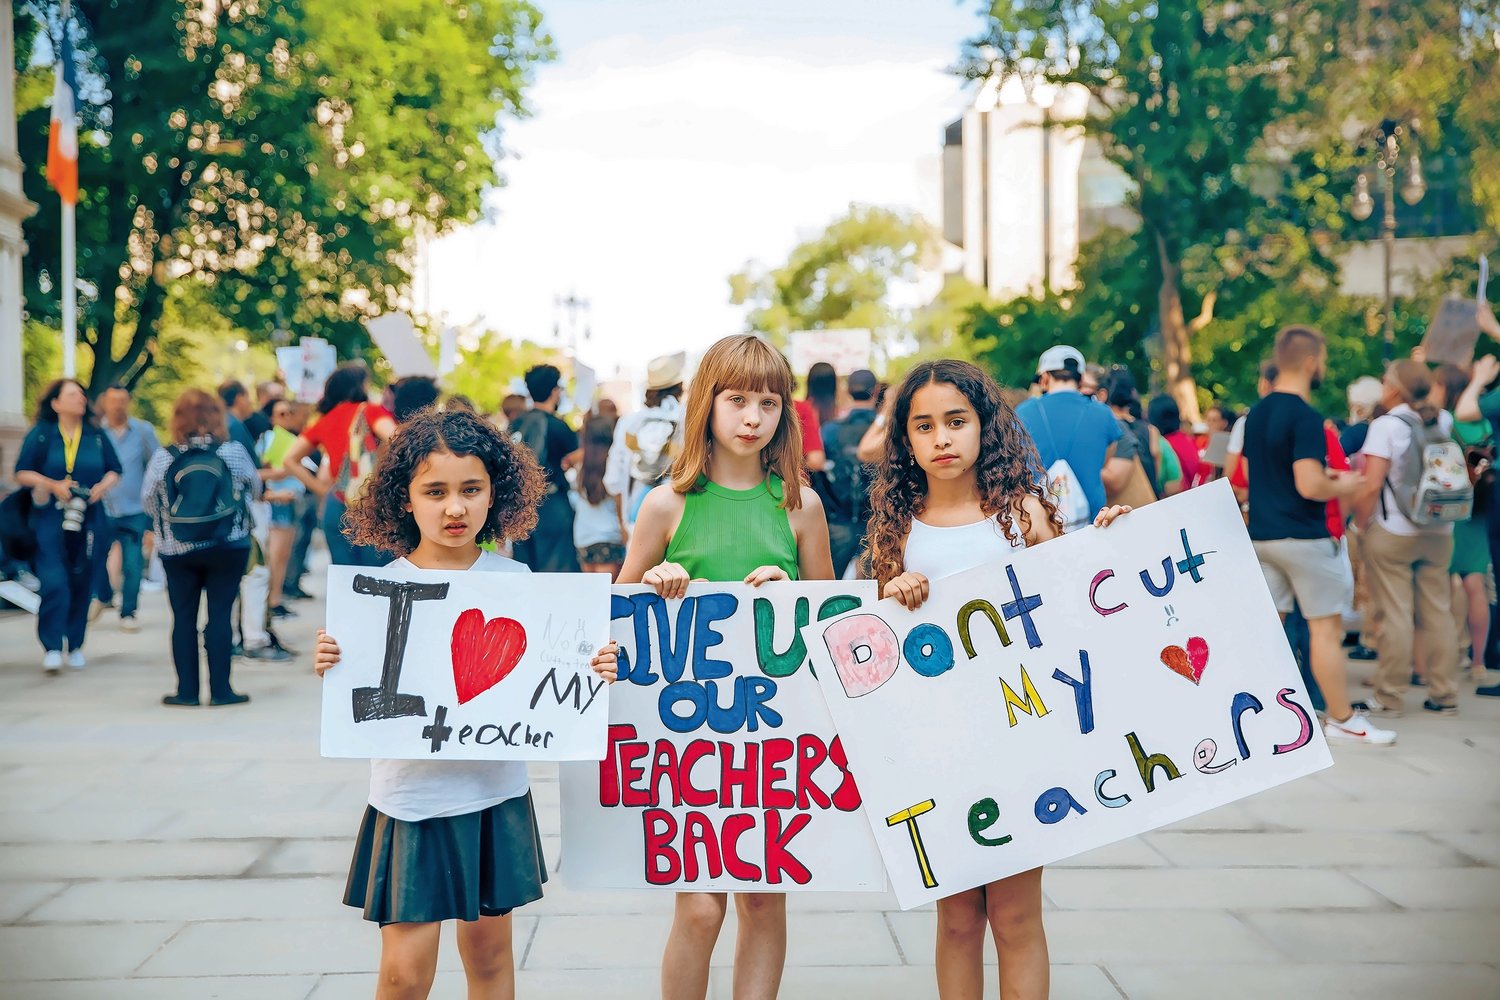 Emma Hoff, middle, a fourth-grader, at P.S. 24 Spuyten Duyvil, joins her friends in a show of support for her teachers at a June 24 rally in front of city hall.